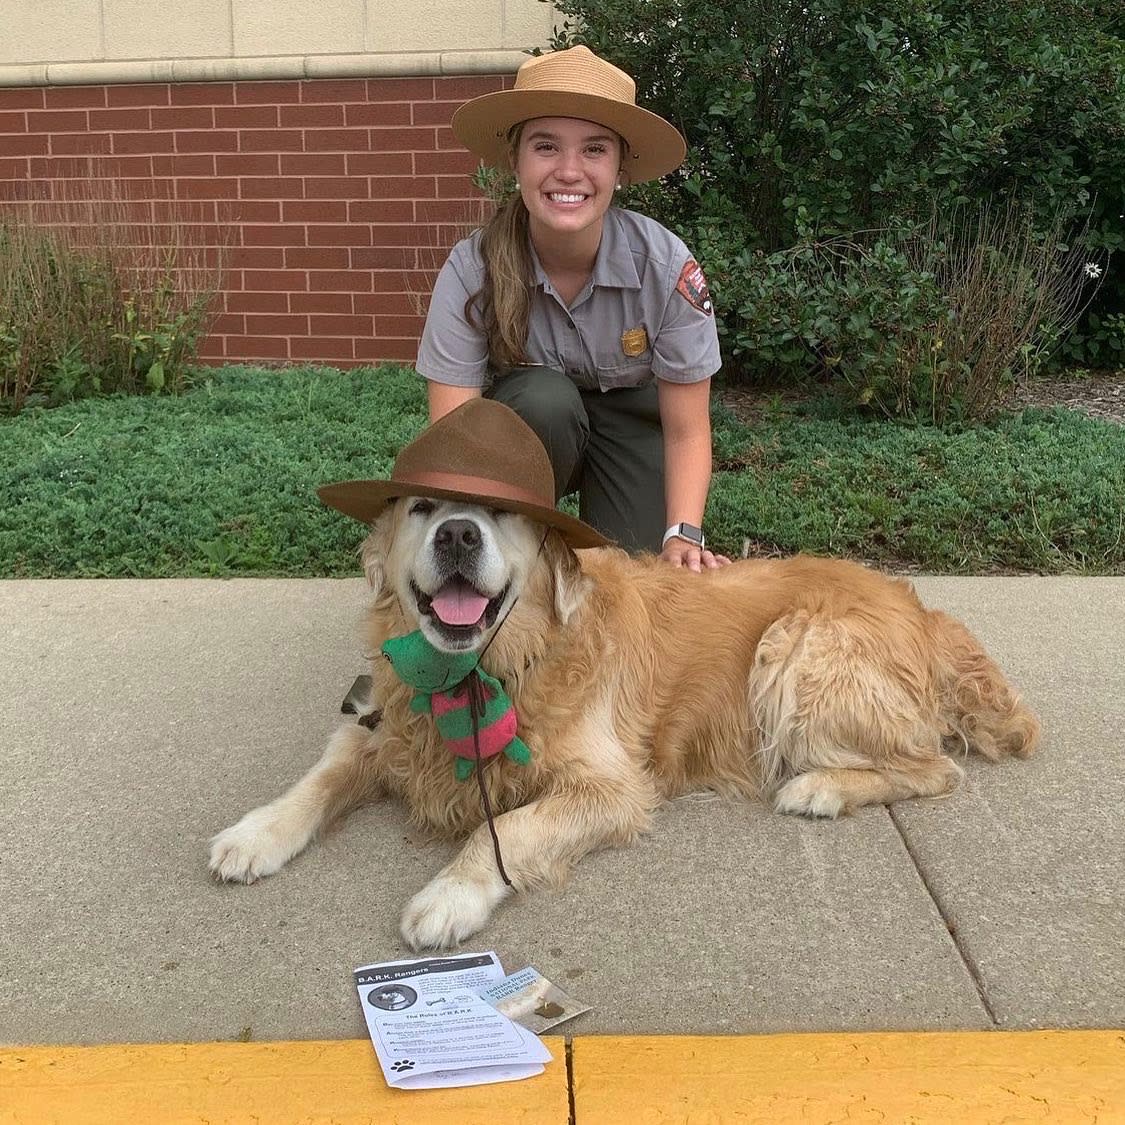 A dog with a park ranger hat sits in front of a park ranger